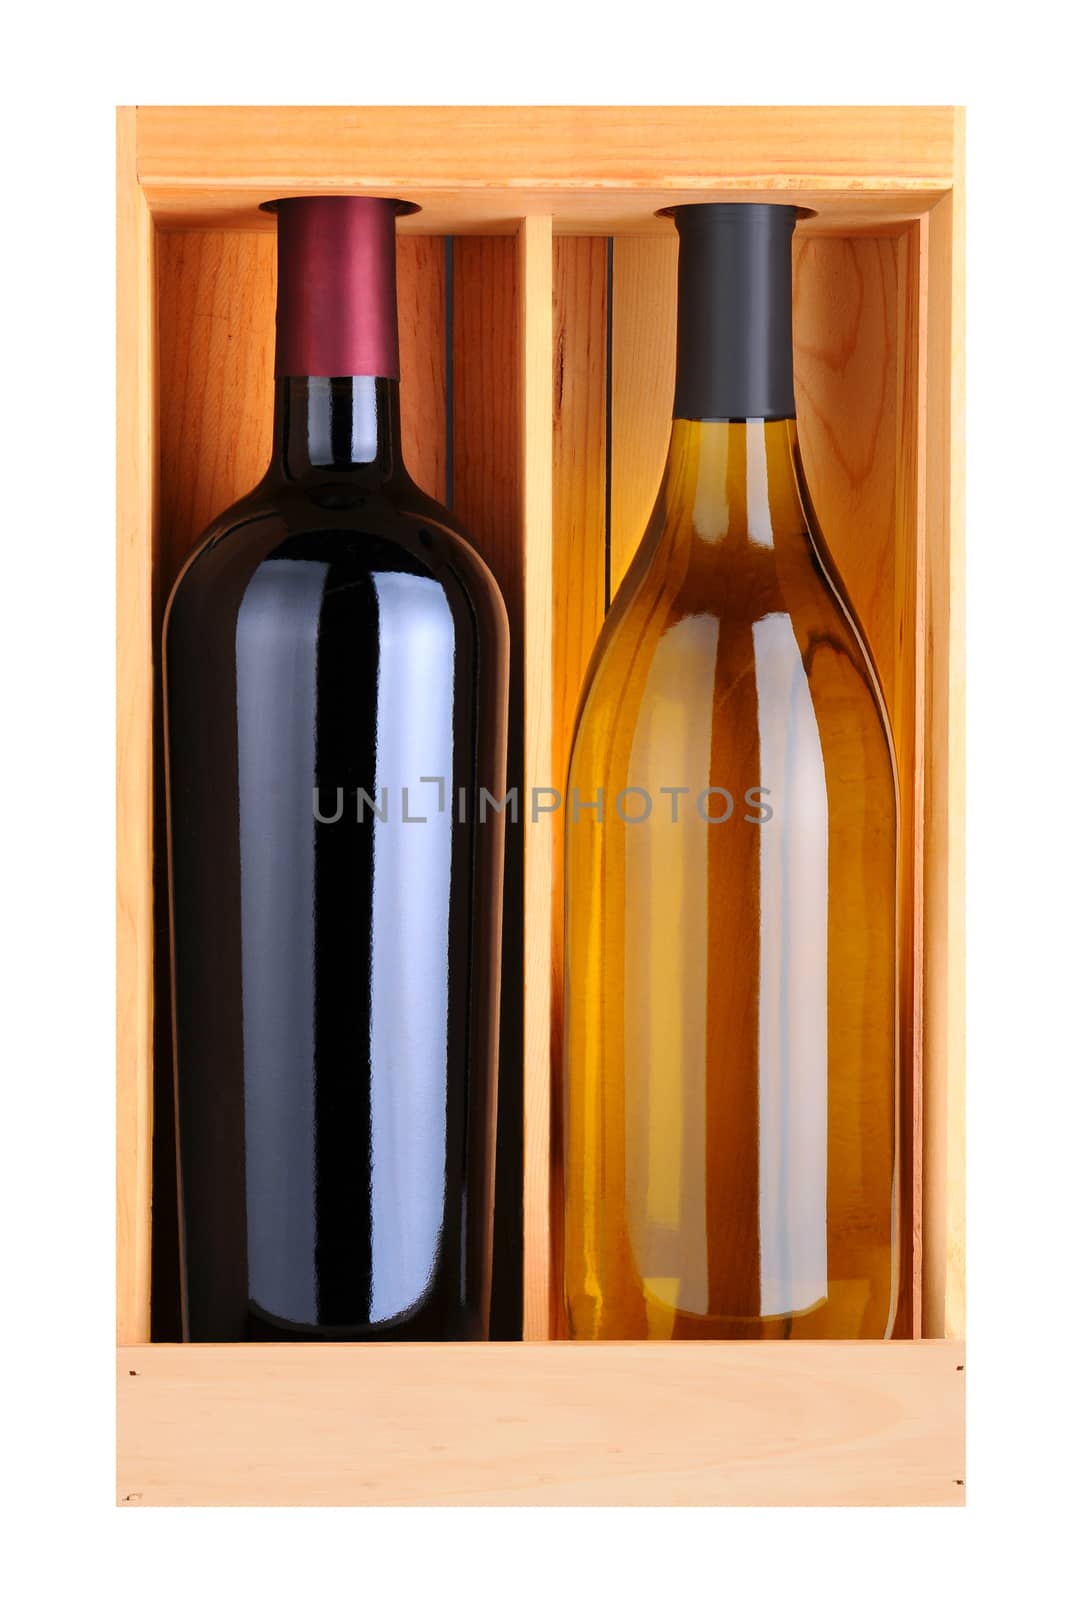 A Cabernet Sauvignoon and Chardonnay bottle without labels in a wood gift box. Vertical format isolated on white.